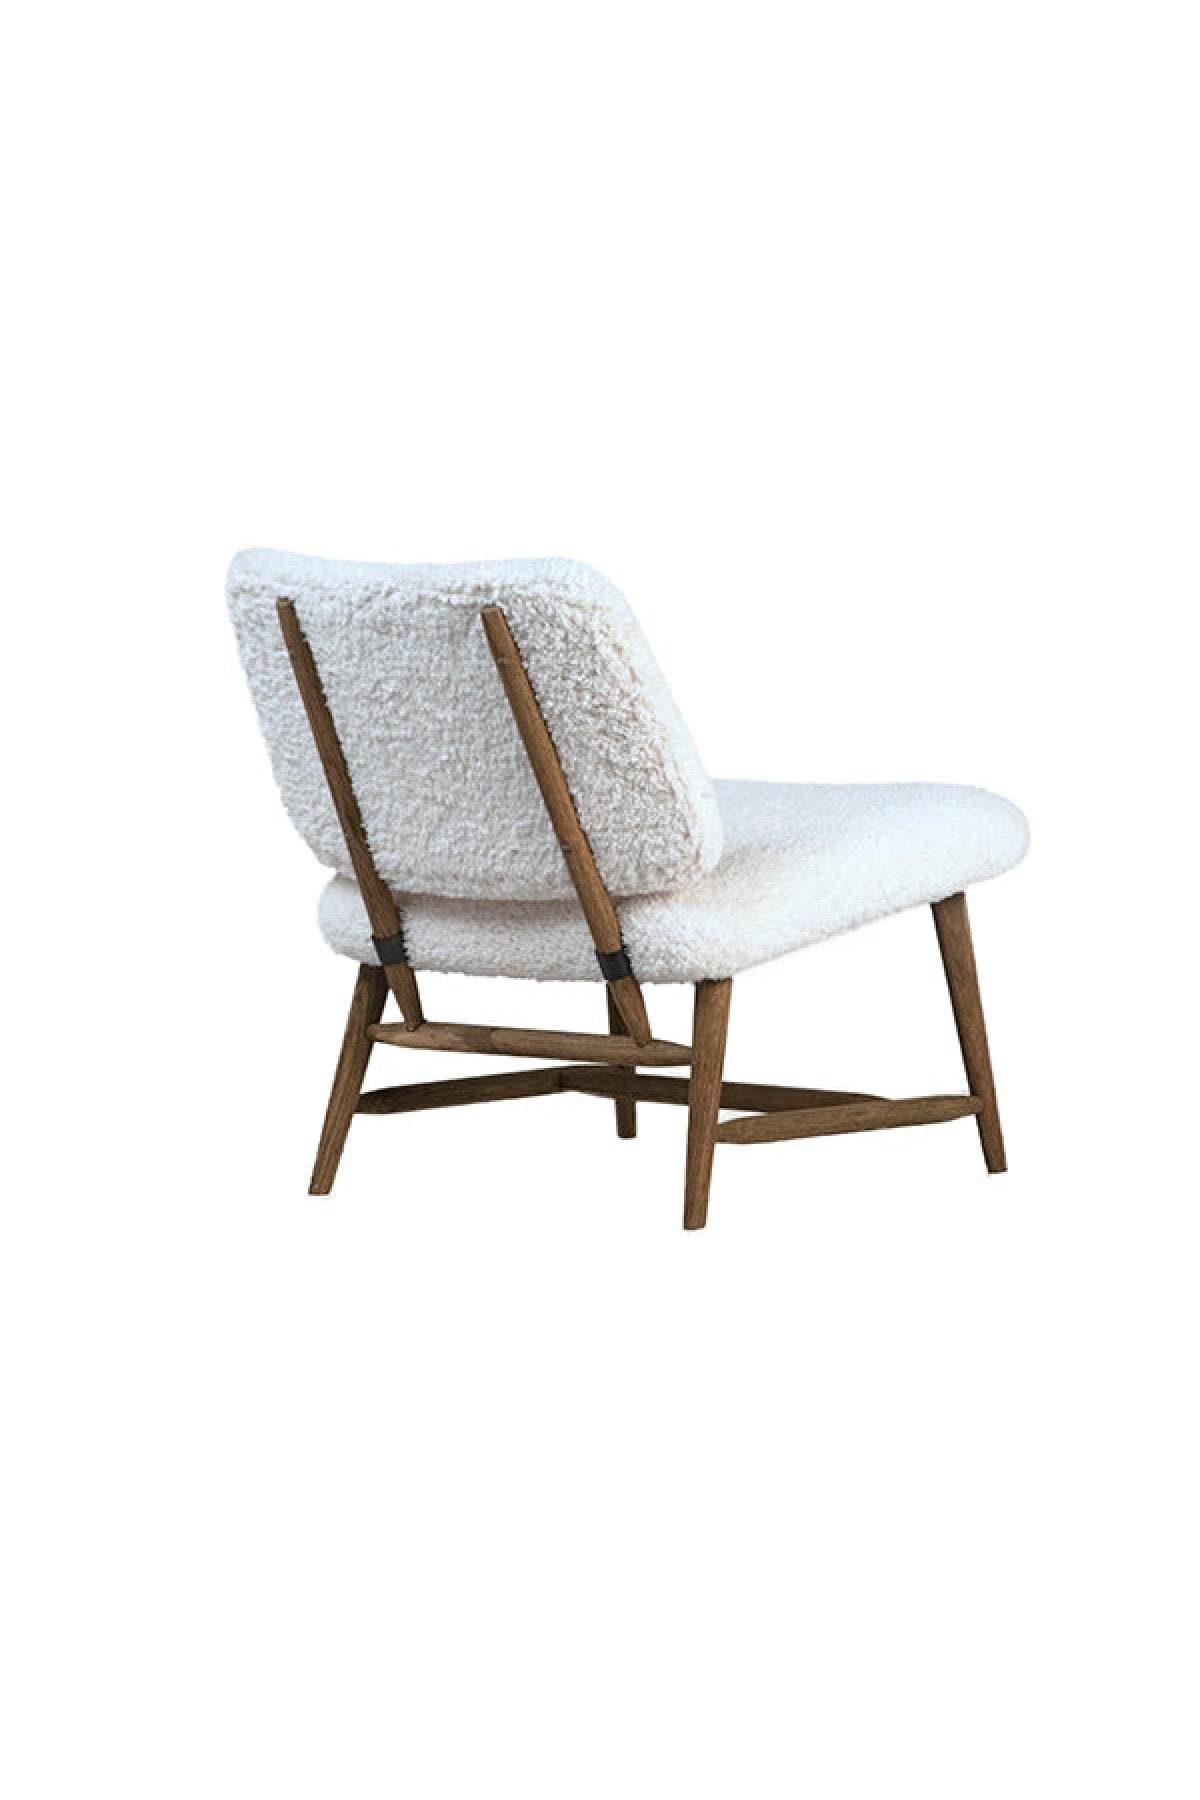 Folley Occasional Chair